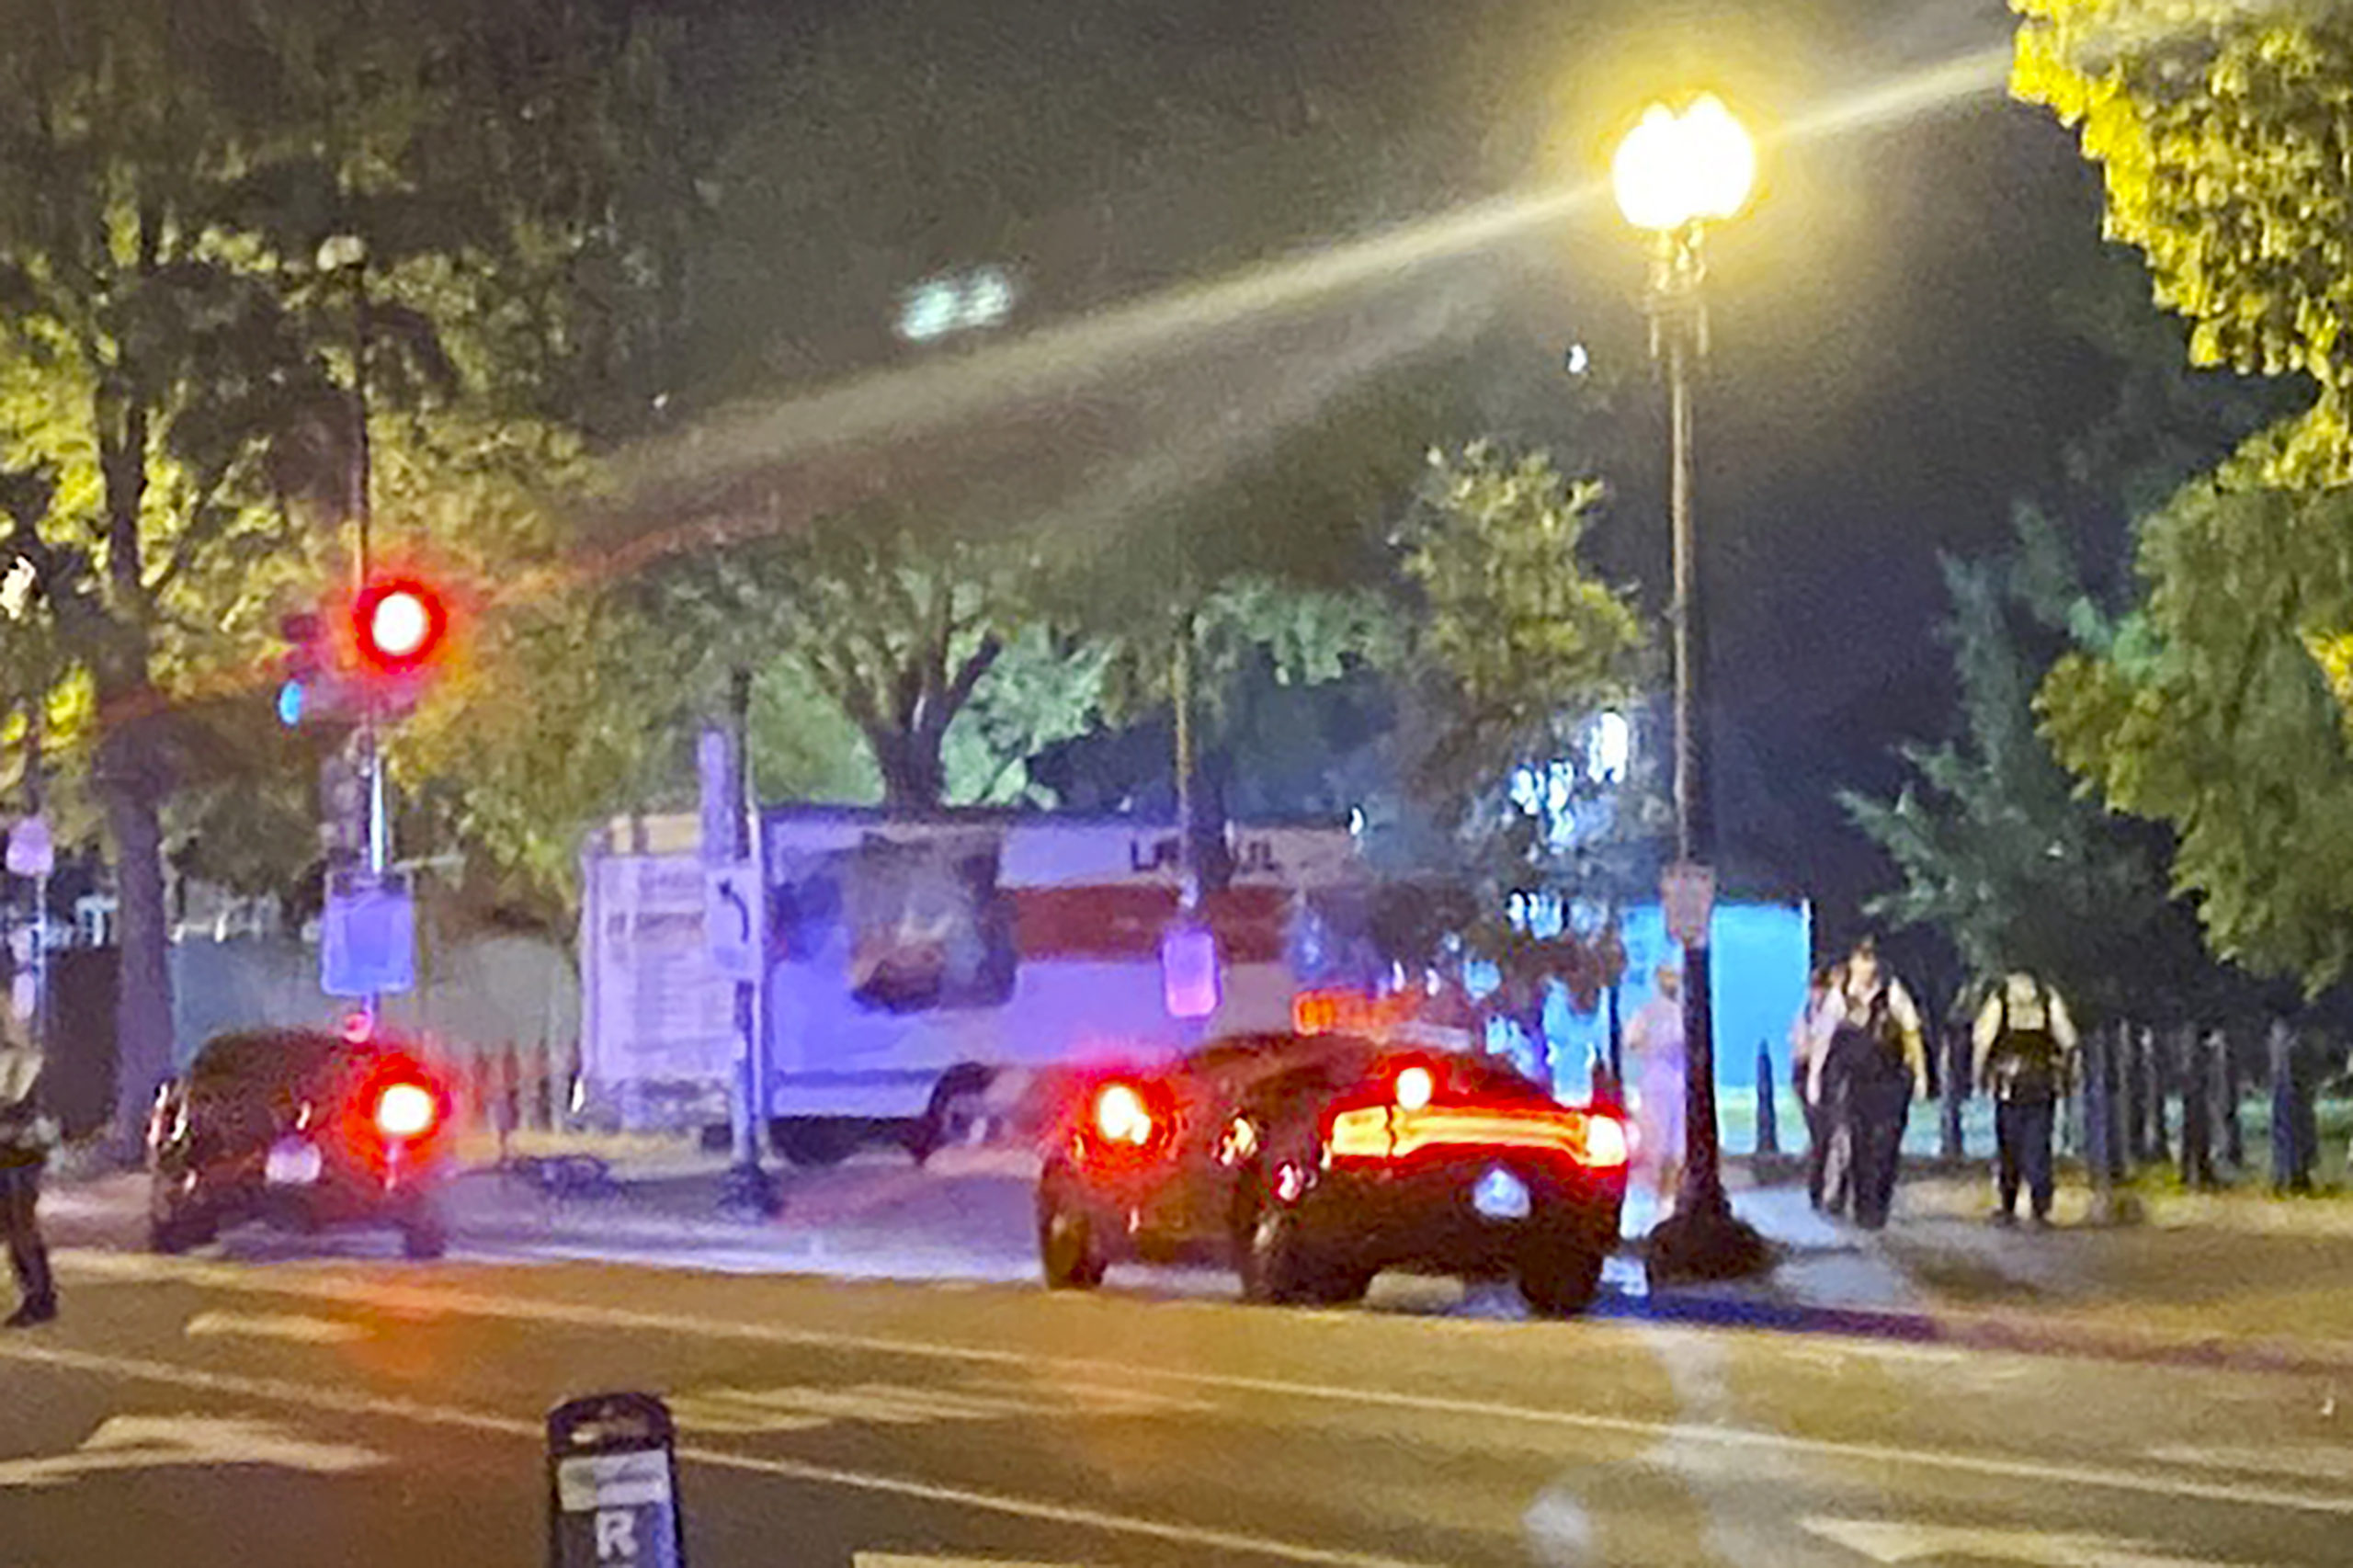 A box truck is seen crashed into a security barrier at a park across from the White House in Washington on Monday night.